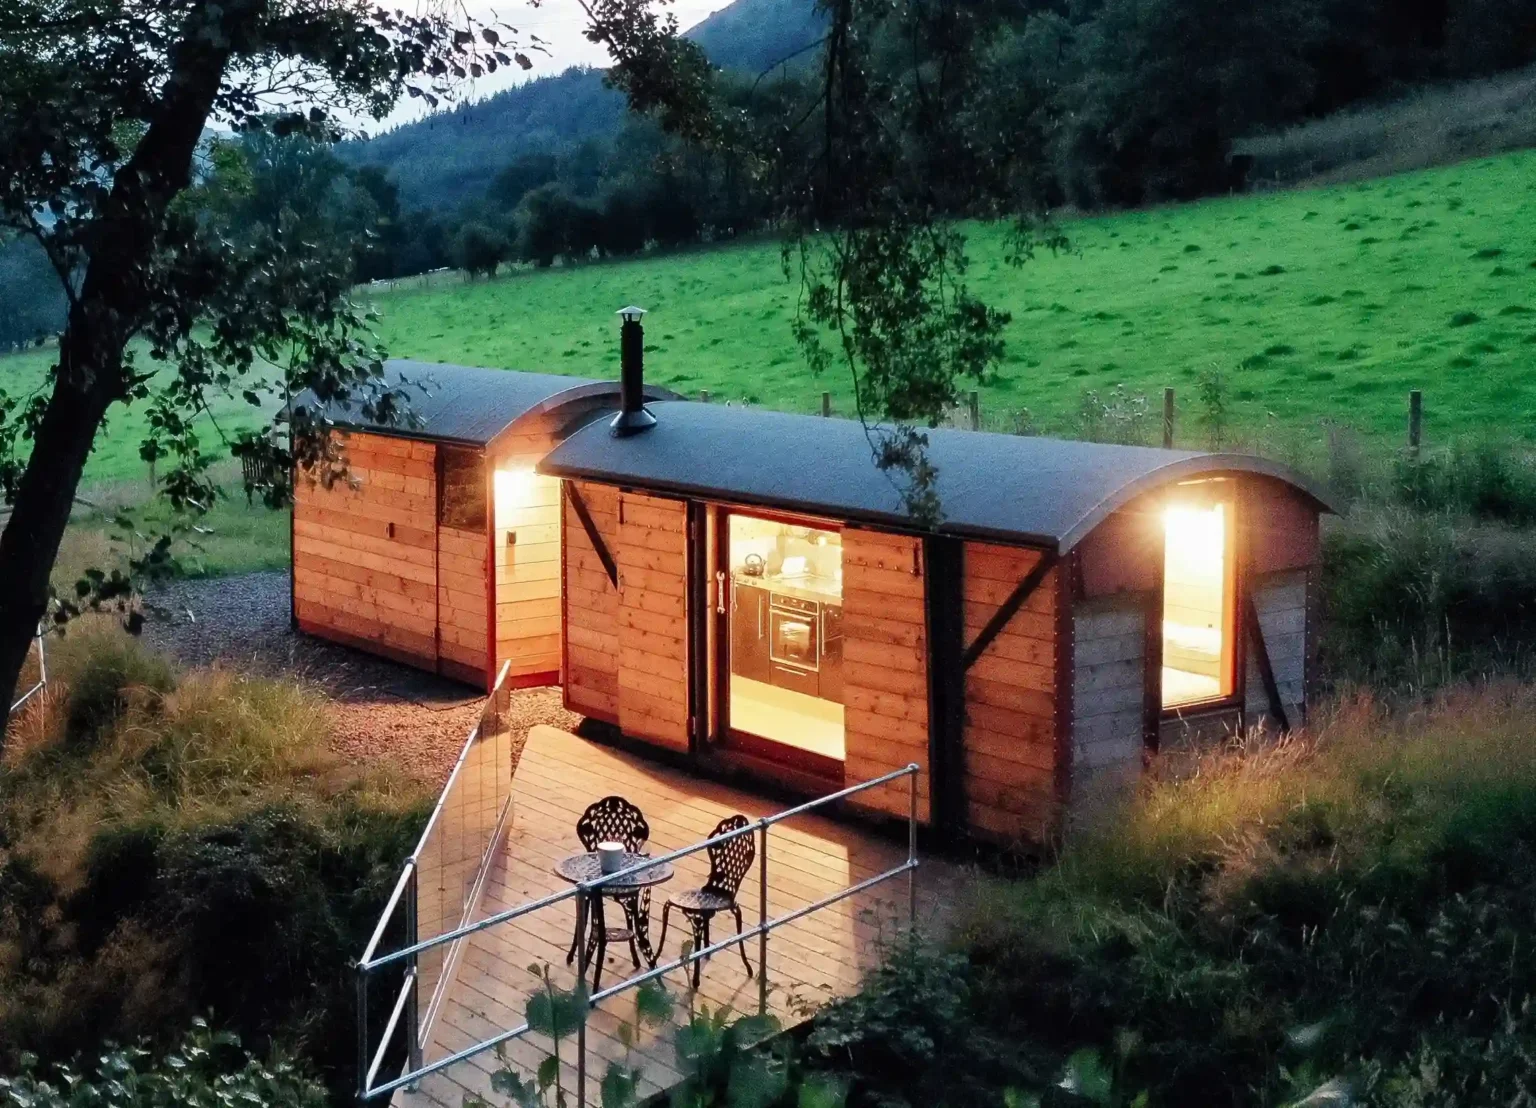 Experience the charm of sleeping on a train in the Welsh Abergavenny uk mountains. available for renting on Airbnb.